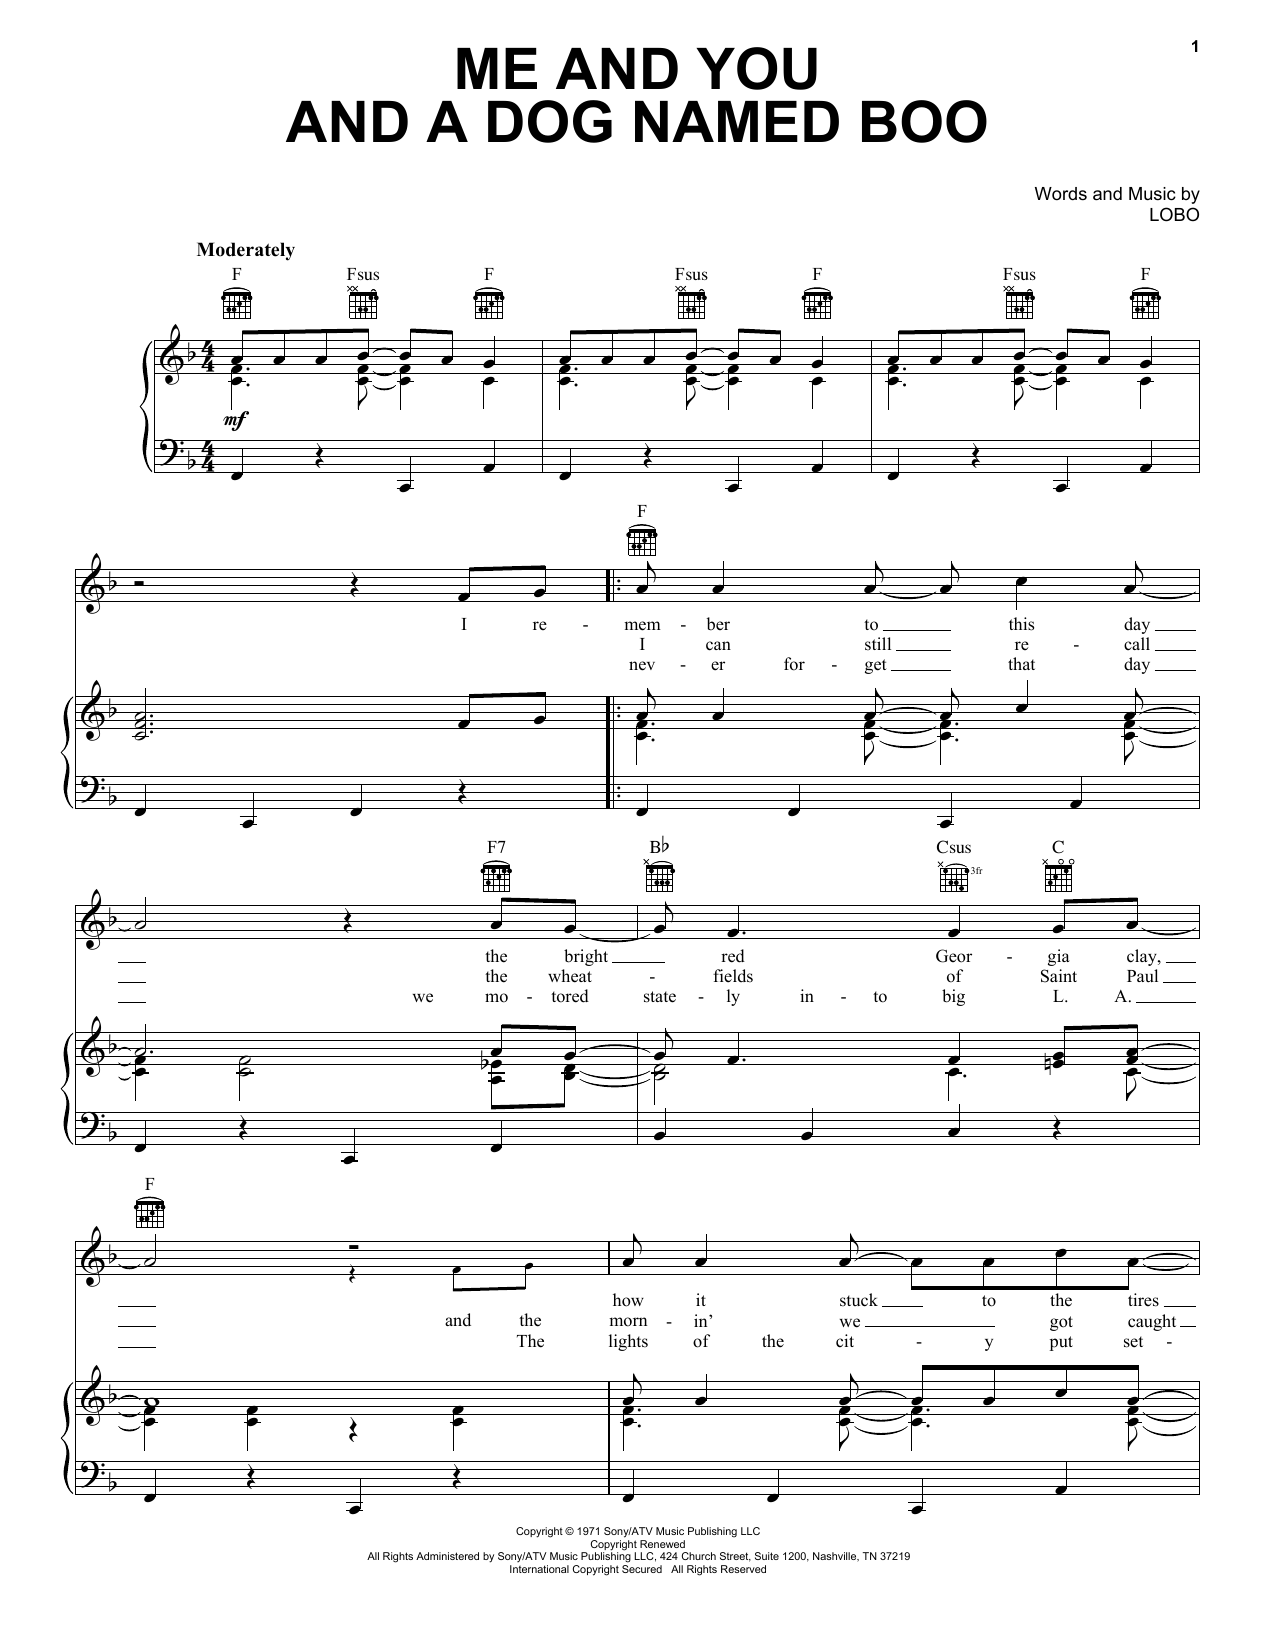 Download Lobo Me And You And A Dog Named Boo sheet music notes and chords for Piano, Vocal & Guitar (Right-Hand Melody) - Download Printable PDF and start playing in minutes.